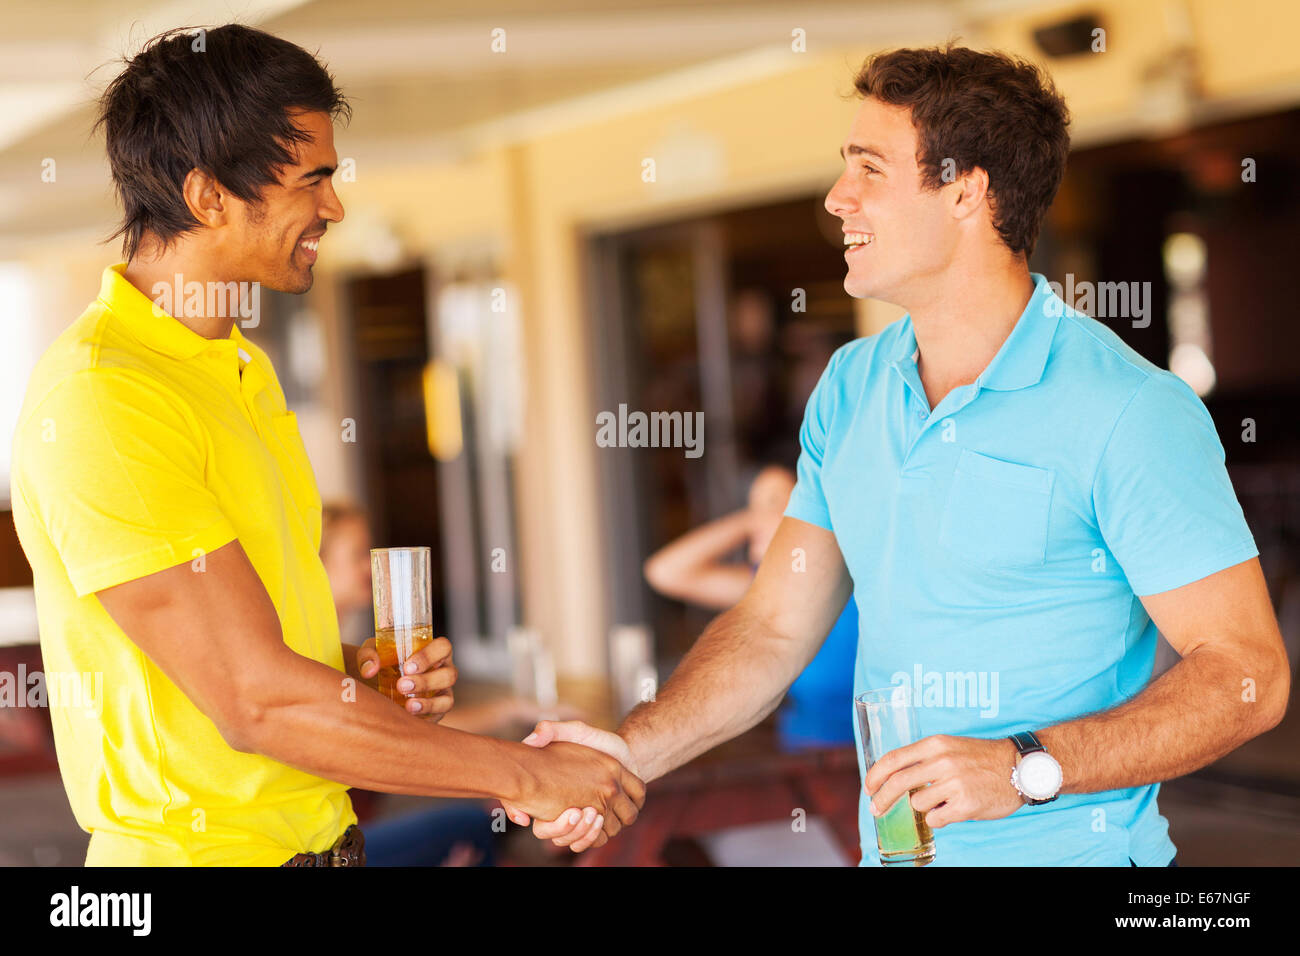 happy friends handshaking at the party Stock Photo